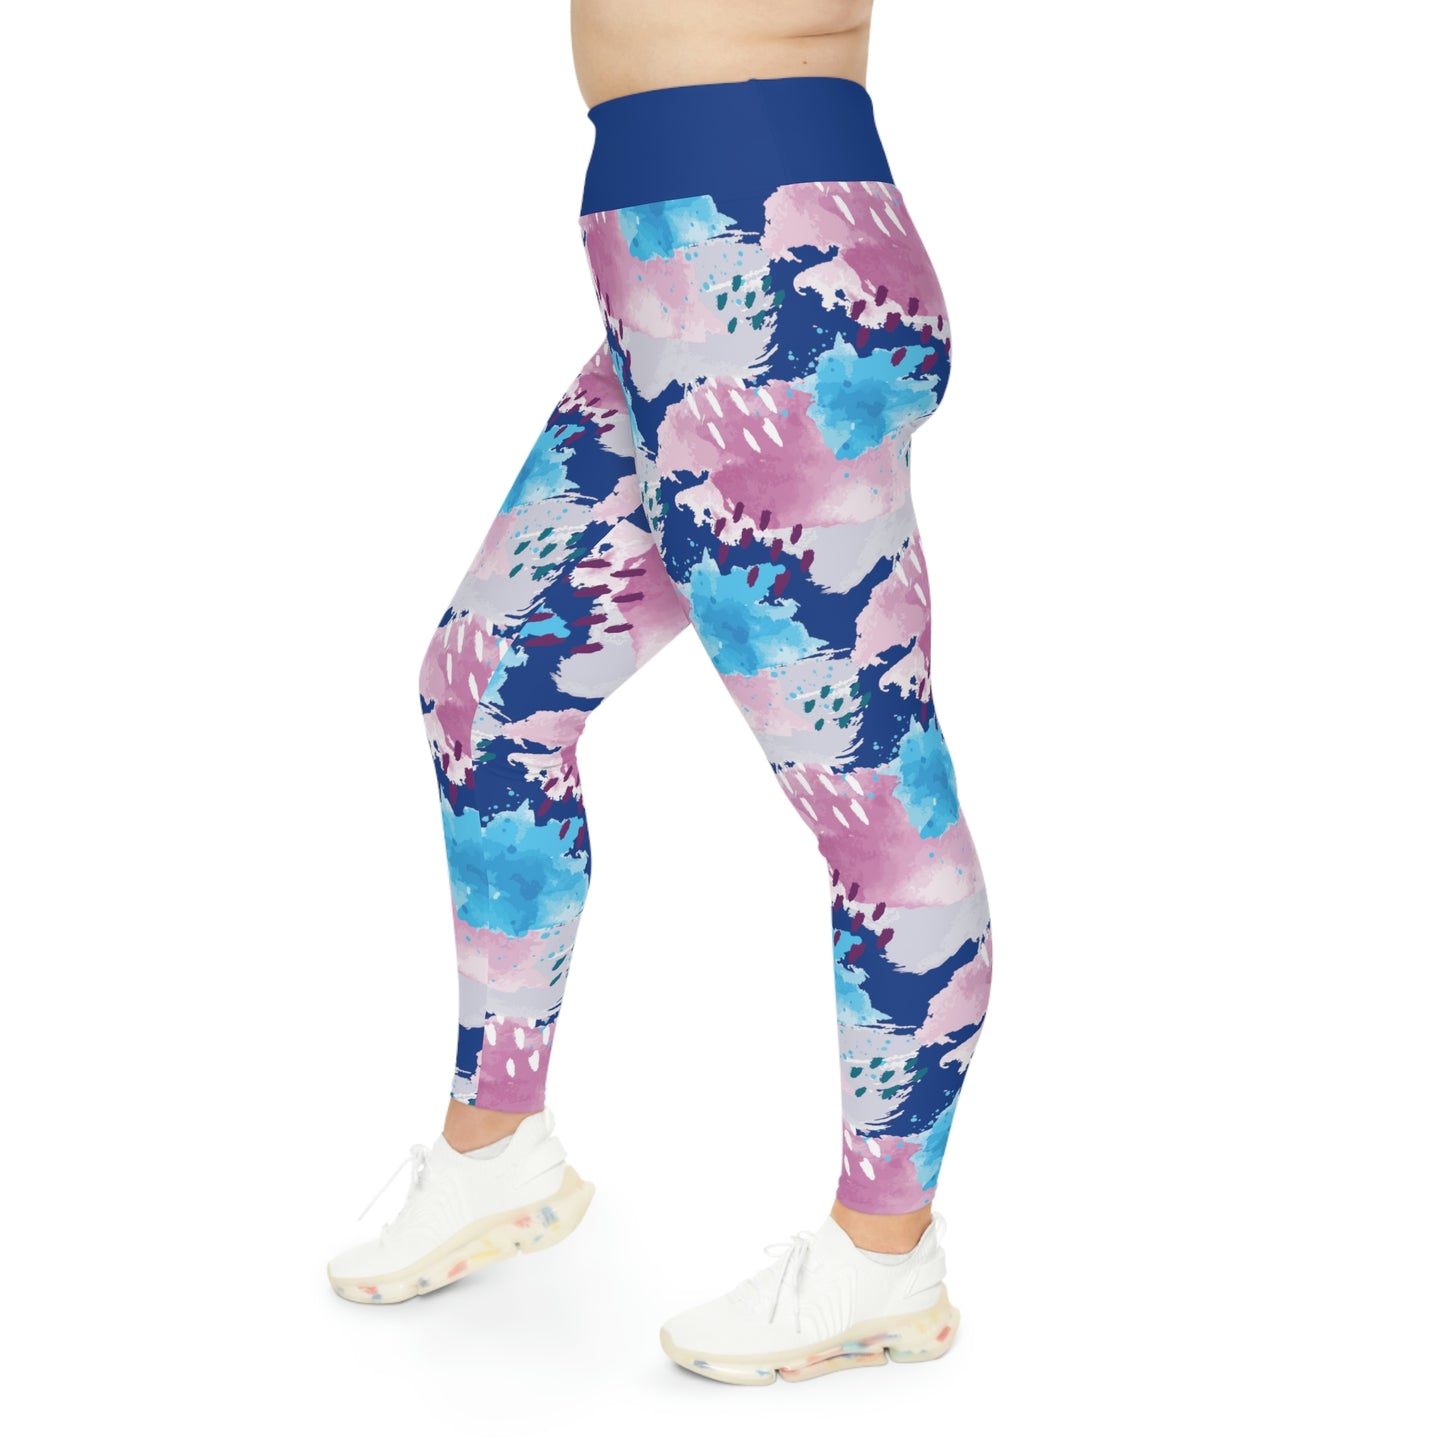 Tye Dye Plus Size Leggings One of a Kind Gift - Unique Workout Activewear tights for Mom fitness, Mothers Day, Girlfriend Christmas Gift